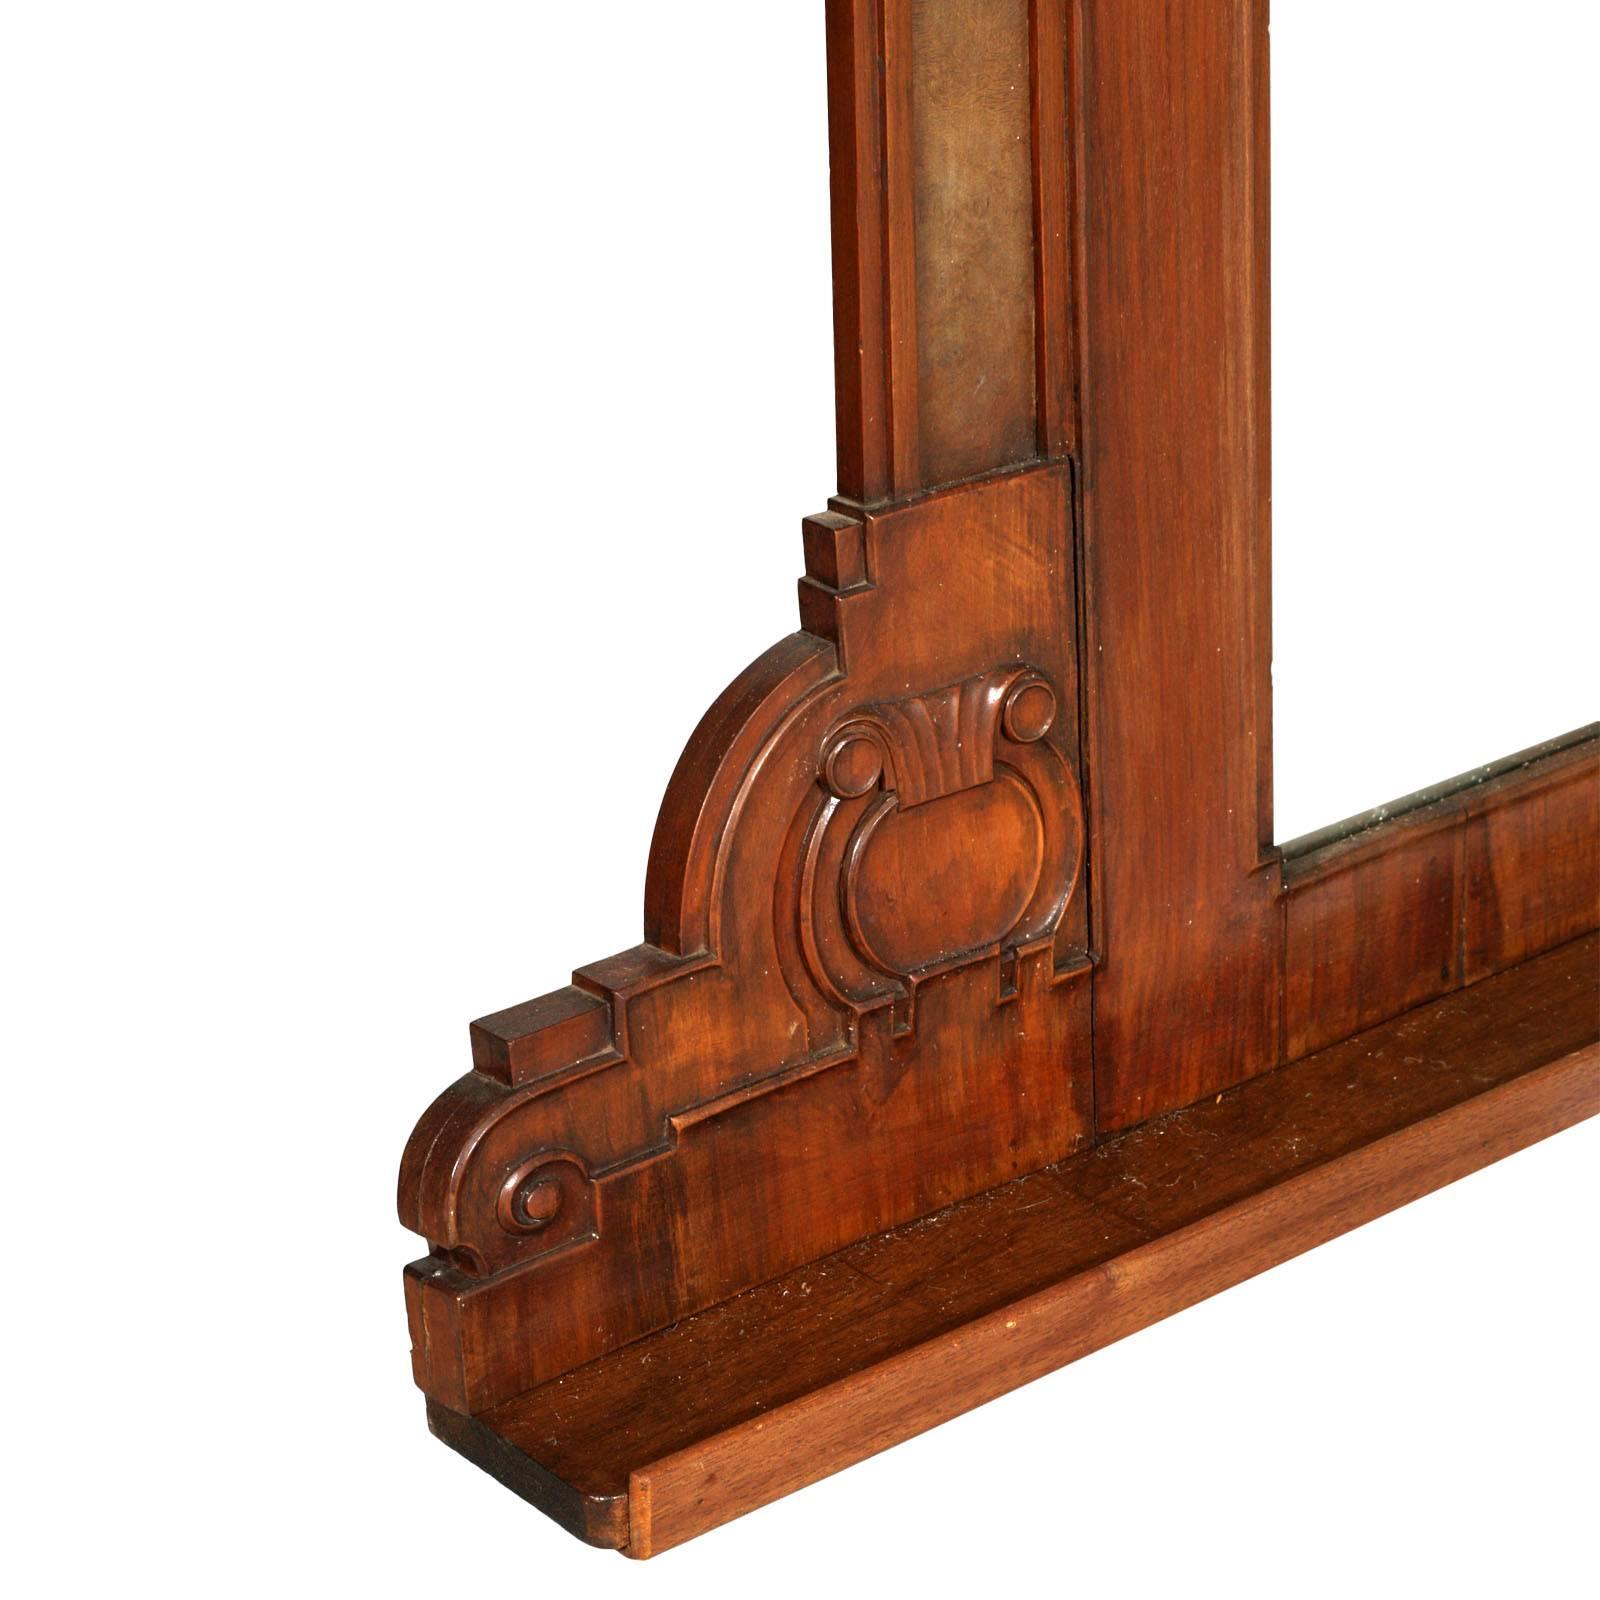 Neoclassical Mid-19th Century Neoclassic Wall Mirror or Fireplace, Hand-Carved Walnut For Sale